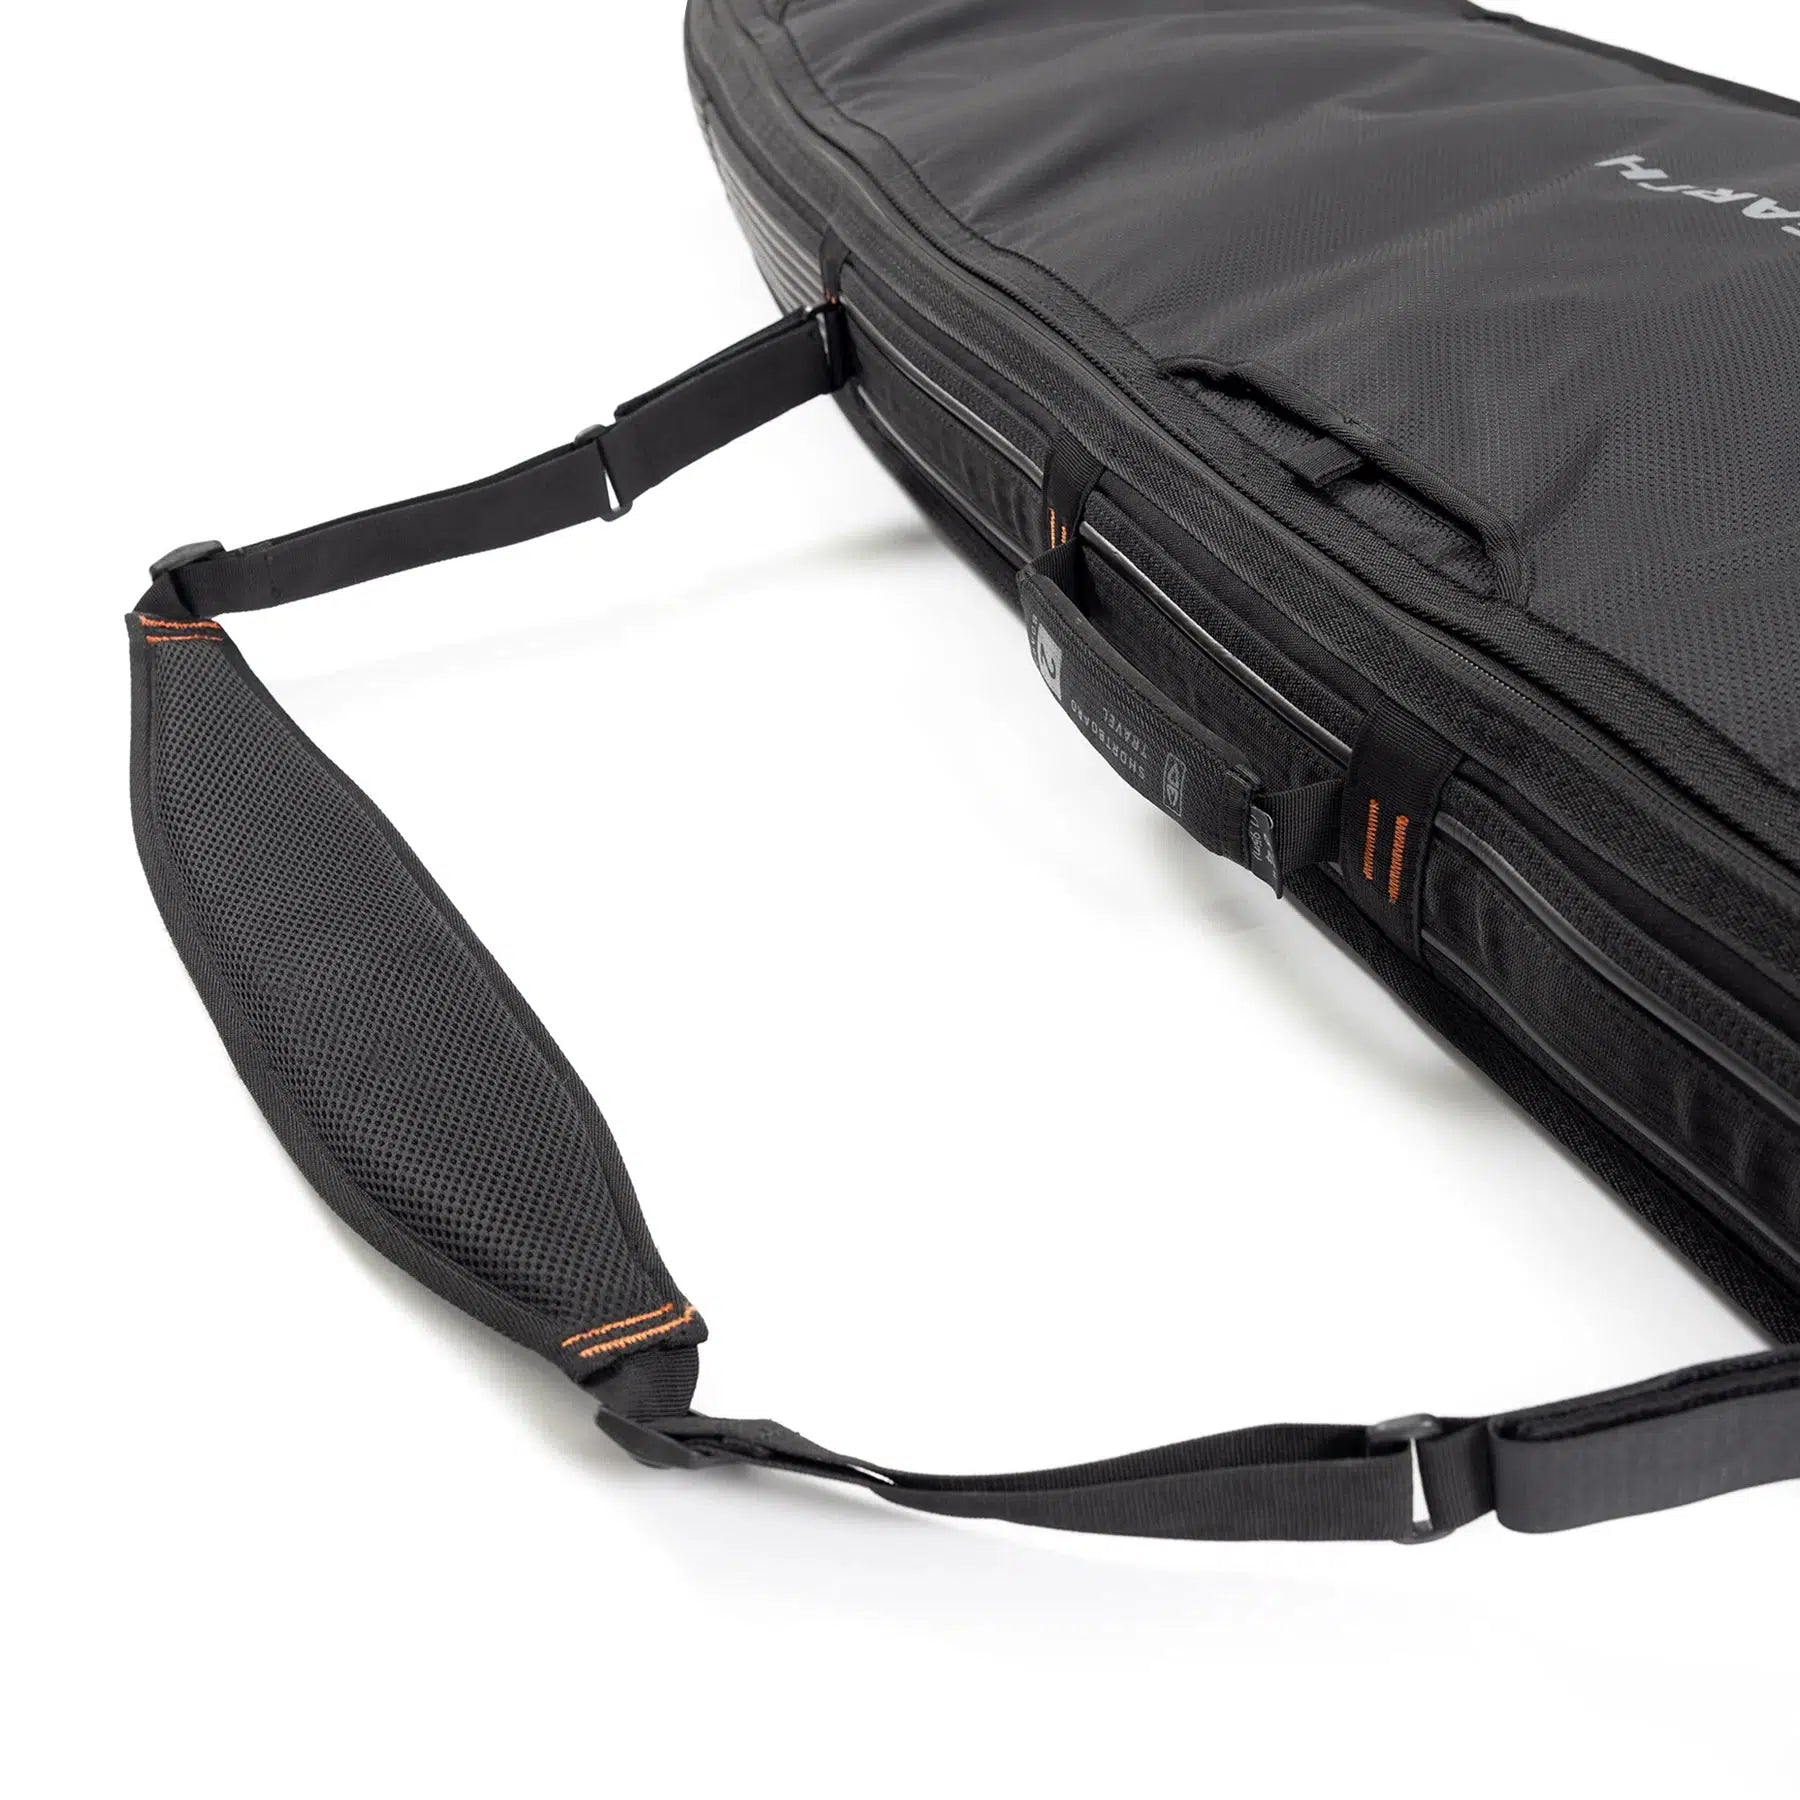 Ocean And Earth HYPA Shortboard Travel Cover - 2 Board